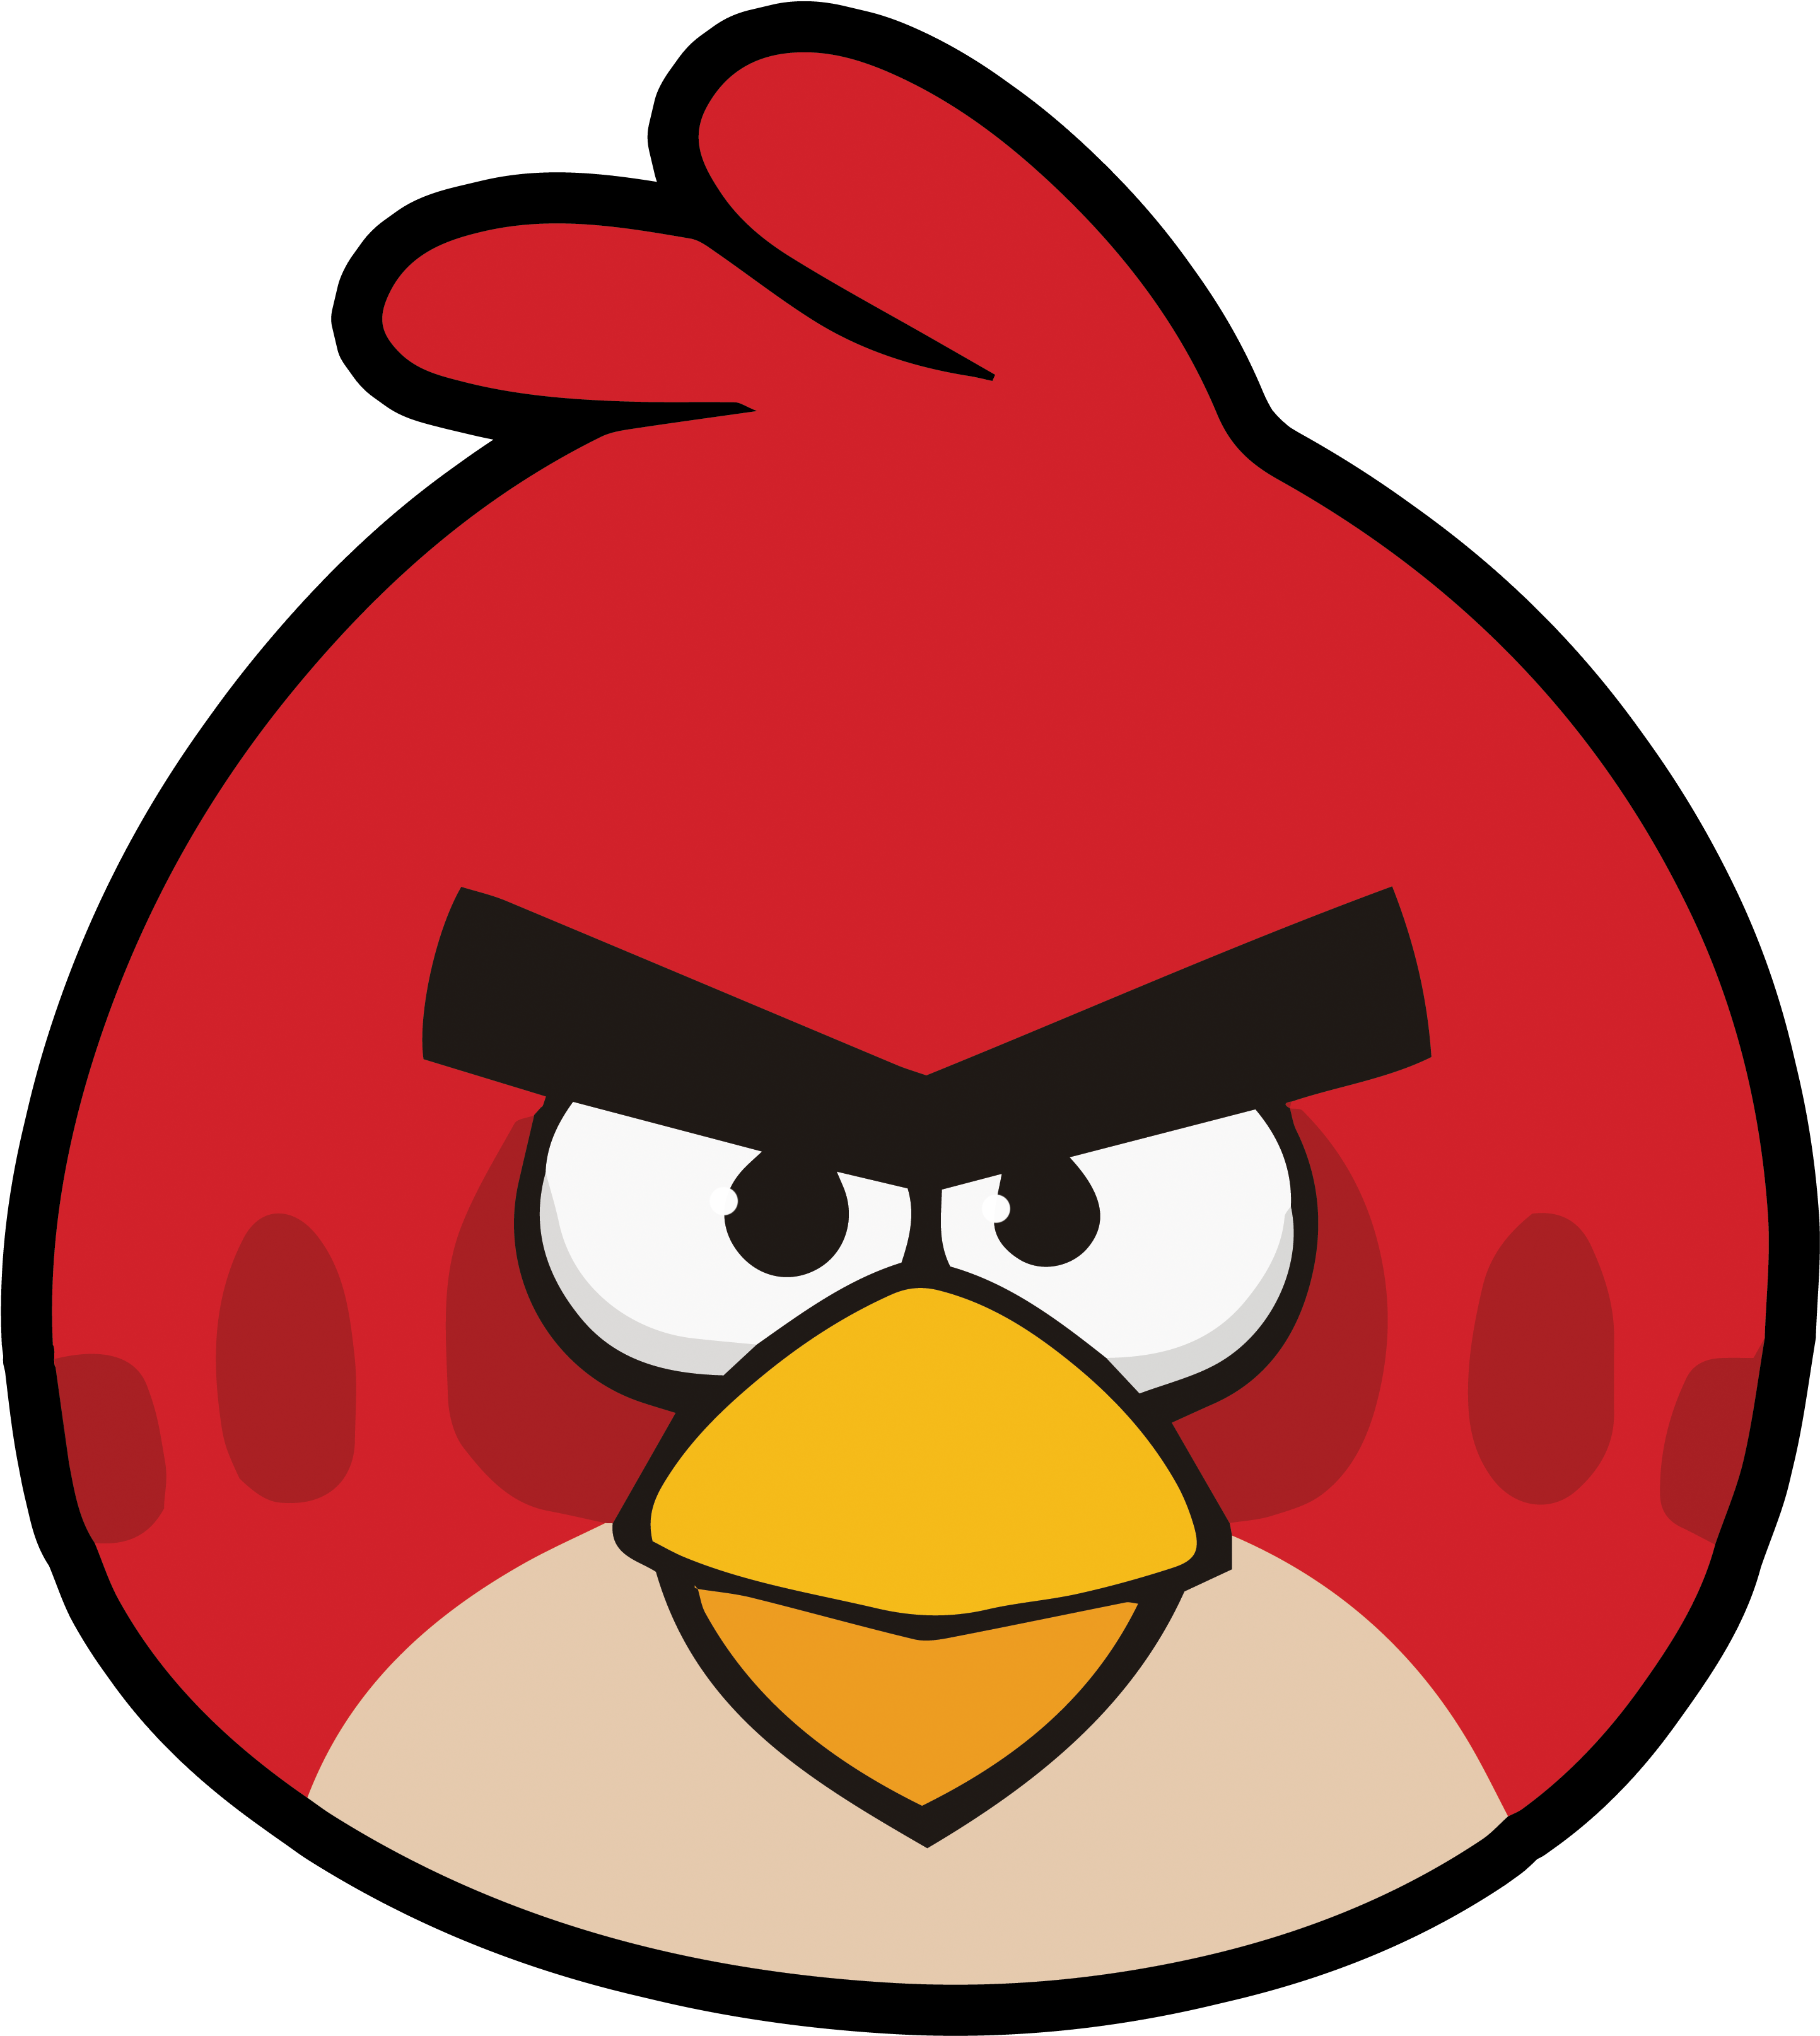 Angry Birds - Red Bird Angry Birds (3400x3400)